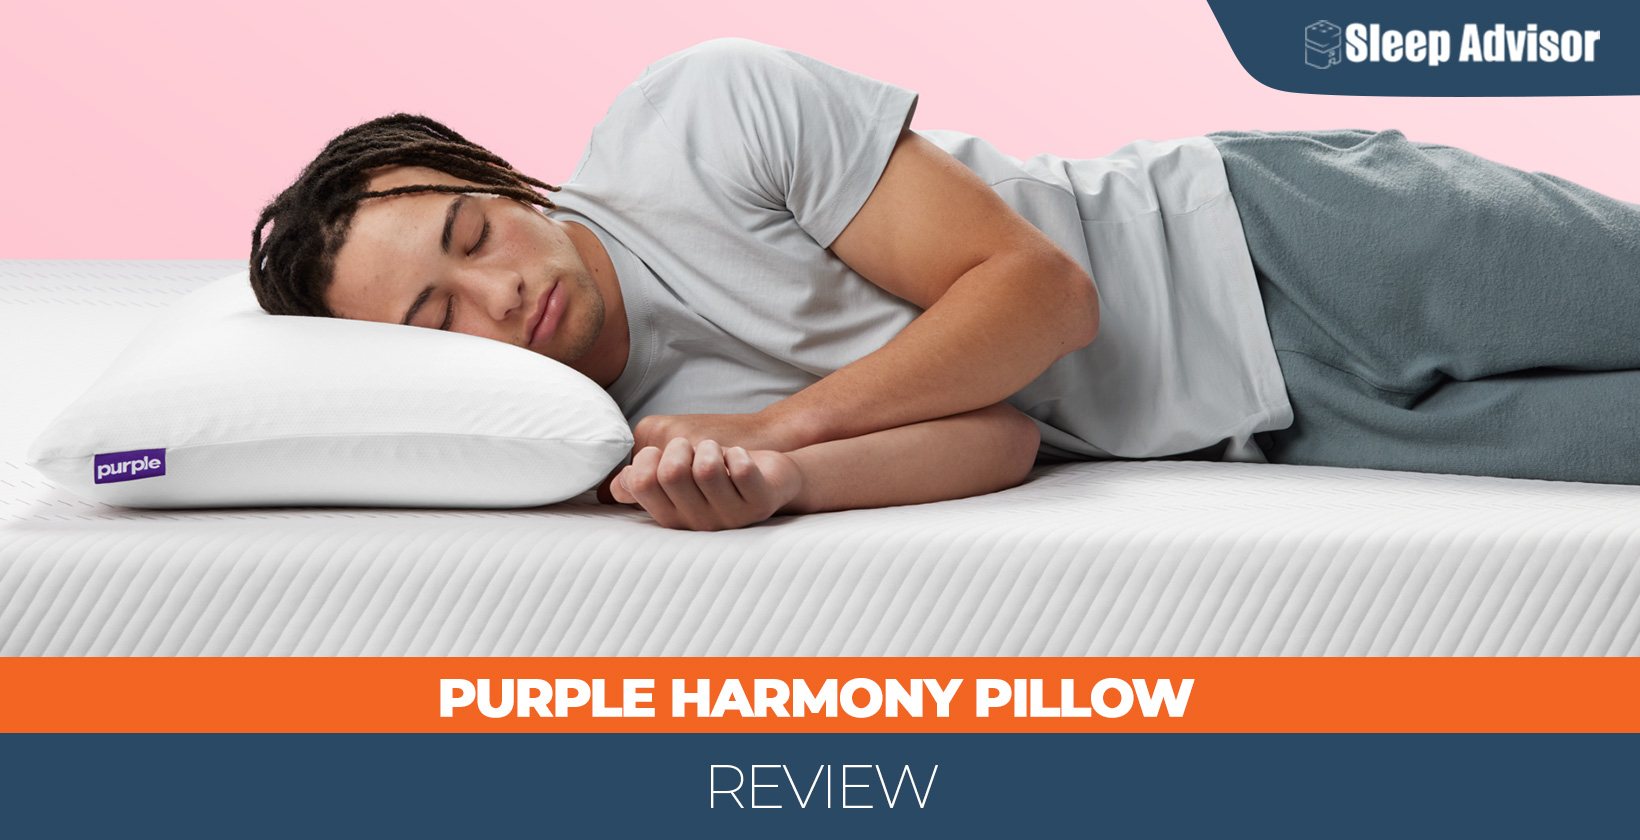 Our in depth overview of the Purple Harmony Pillow